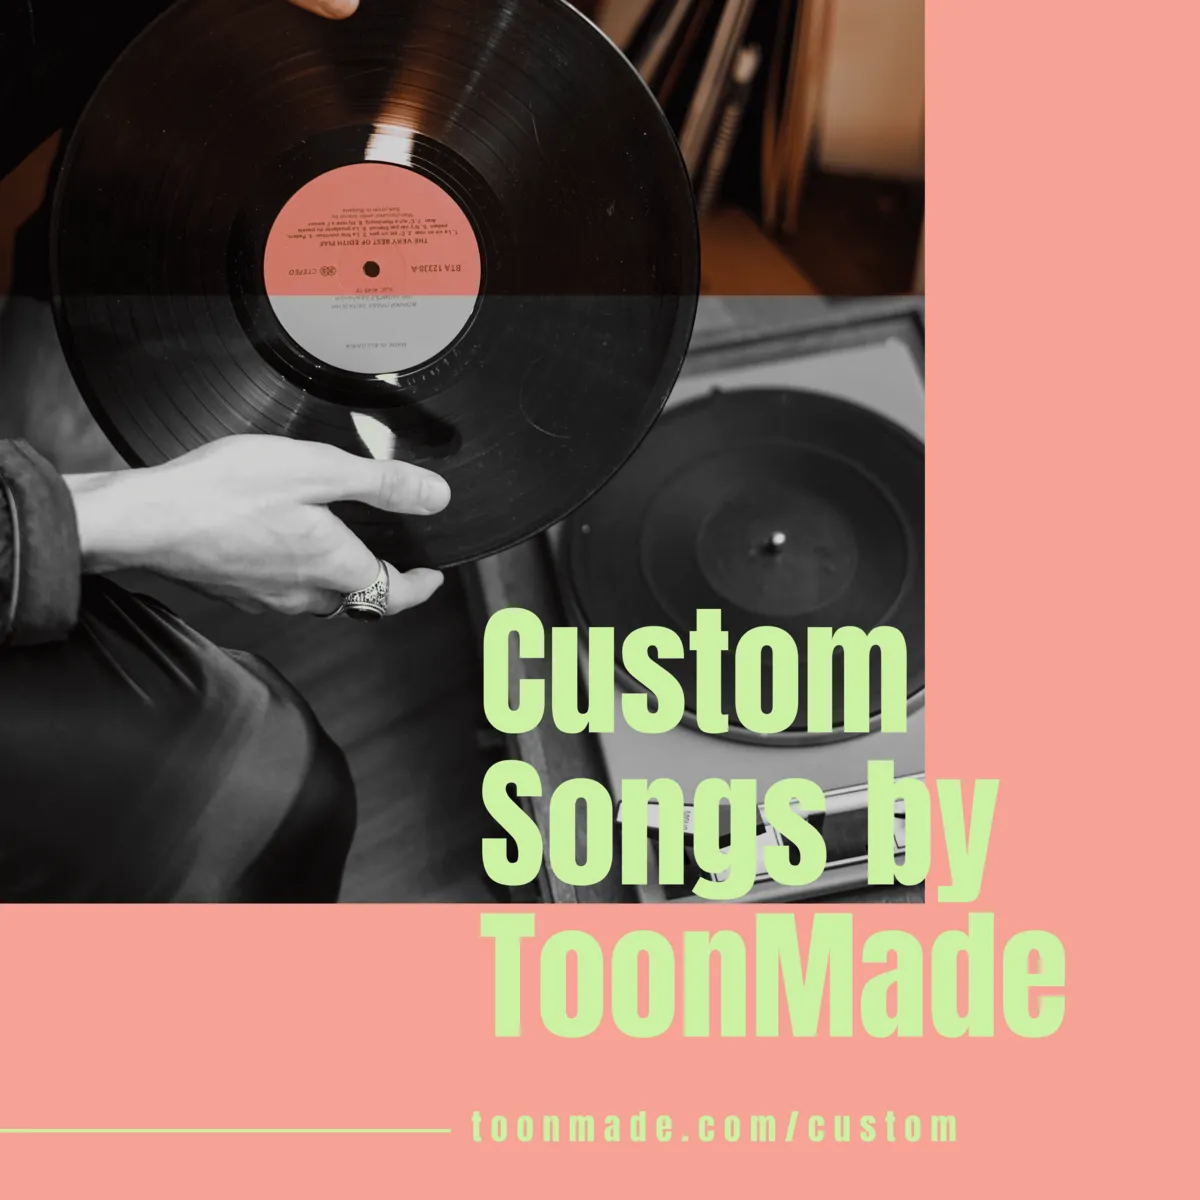 Custom Song from Stephen Toon/Toonmade - see rate sheet below for details on each package